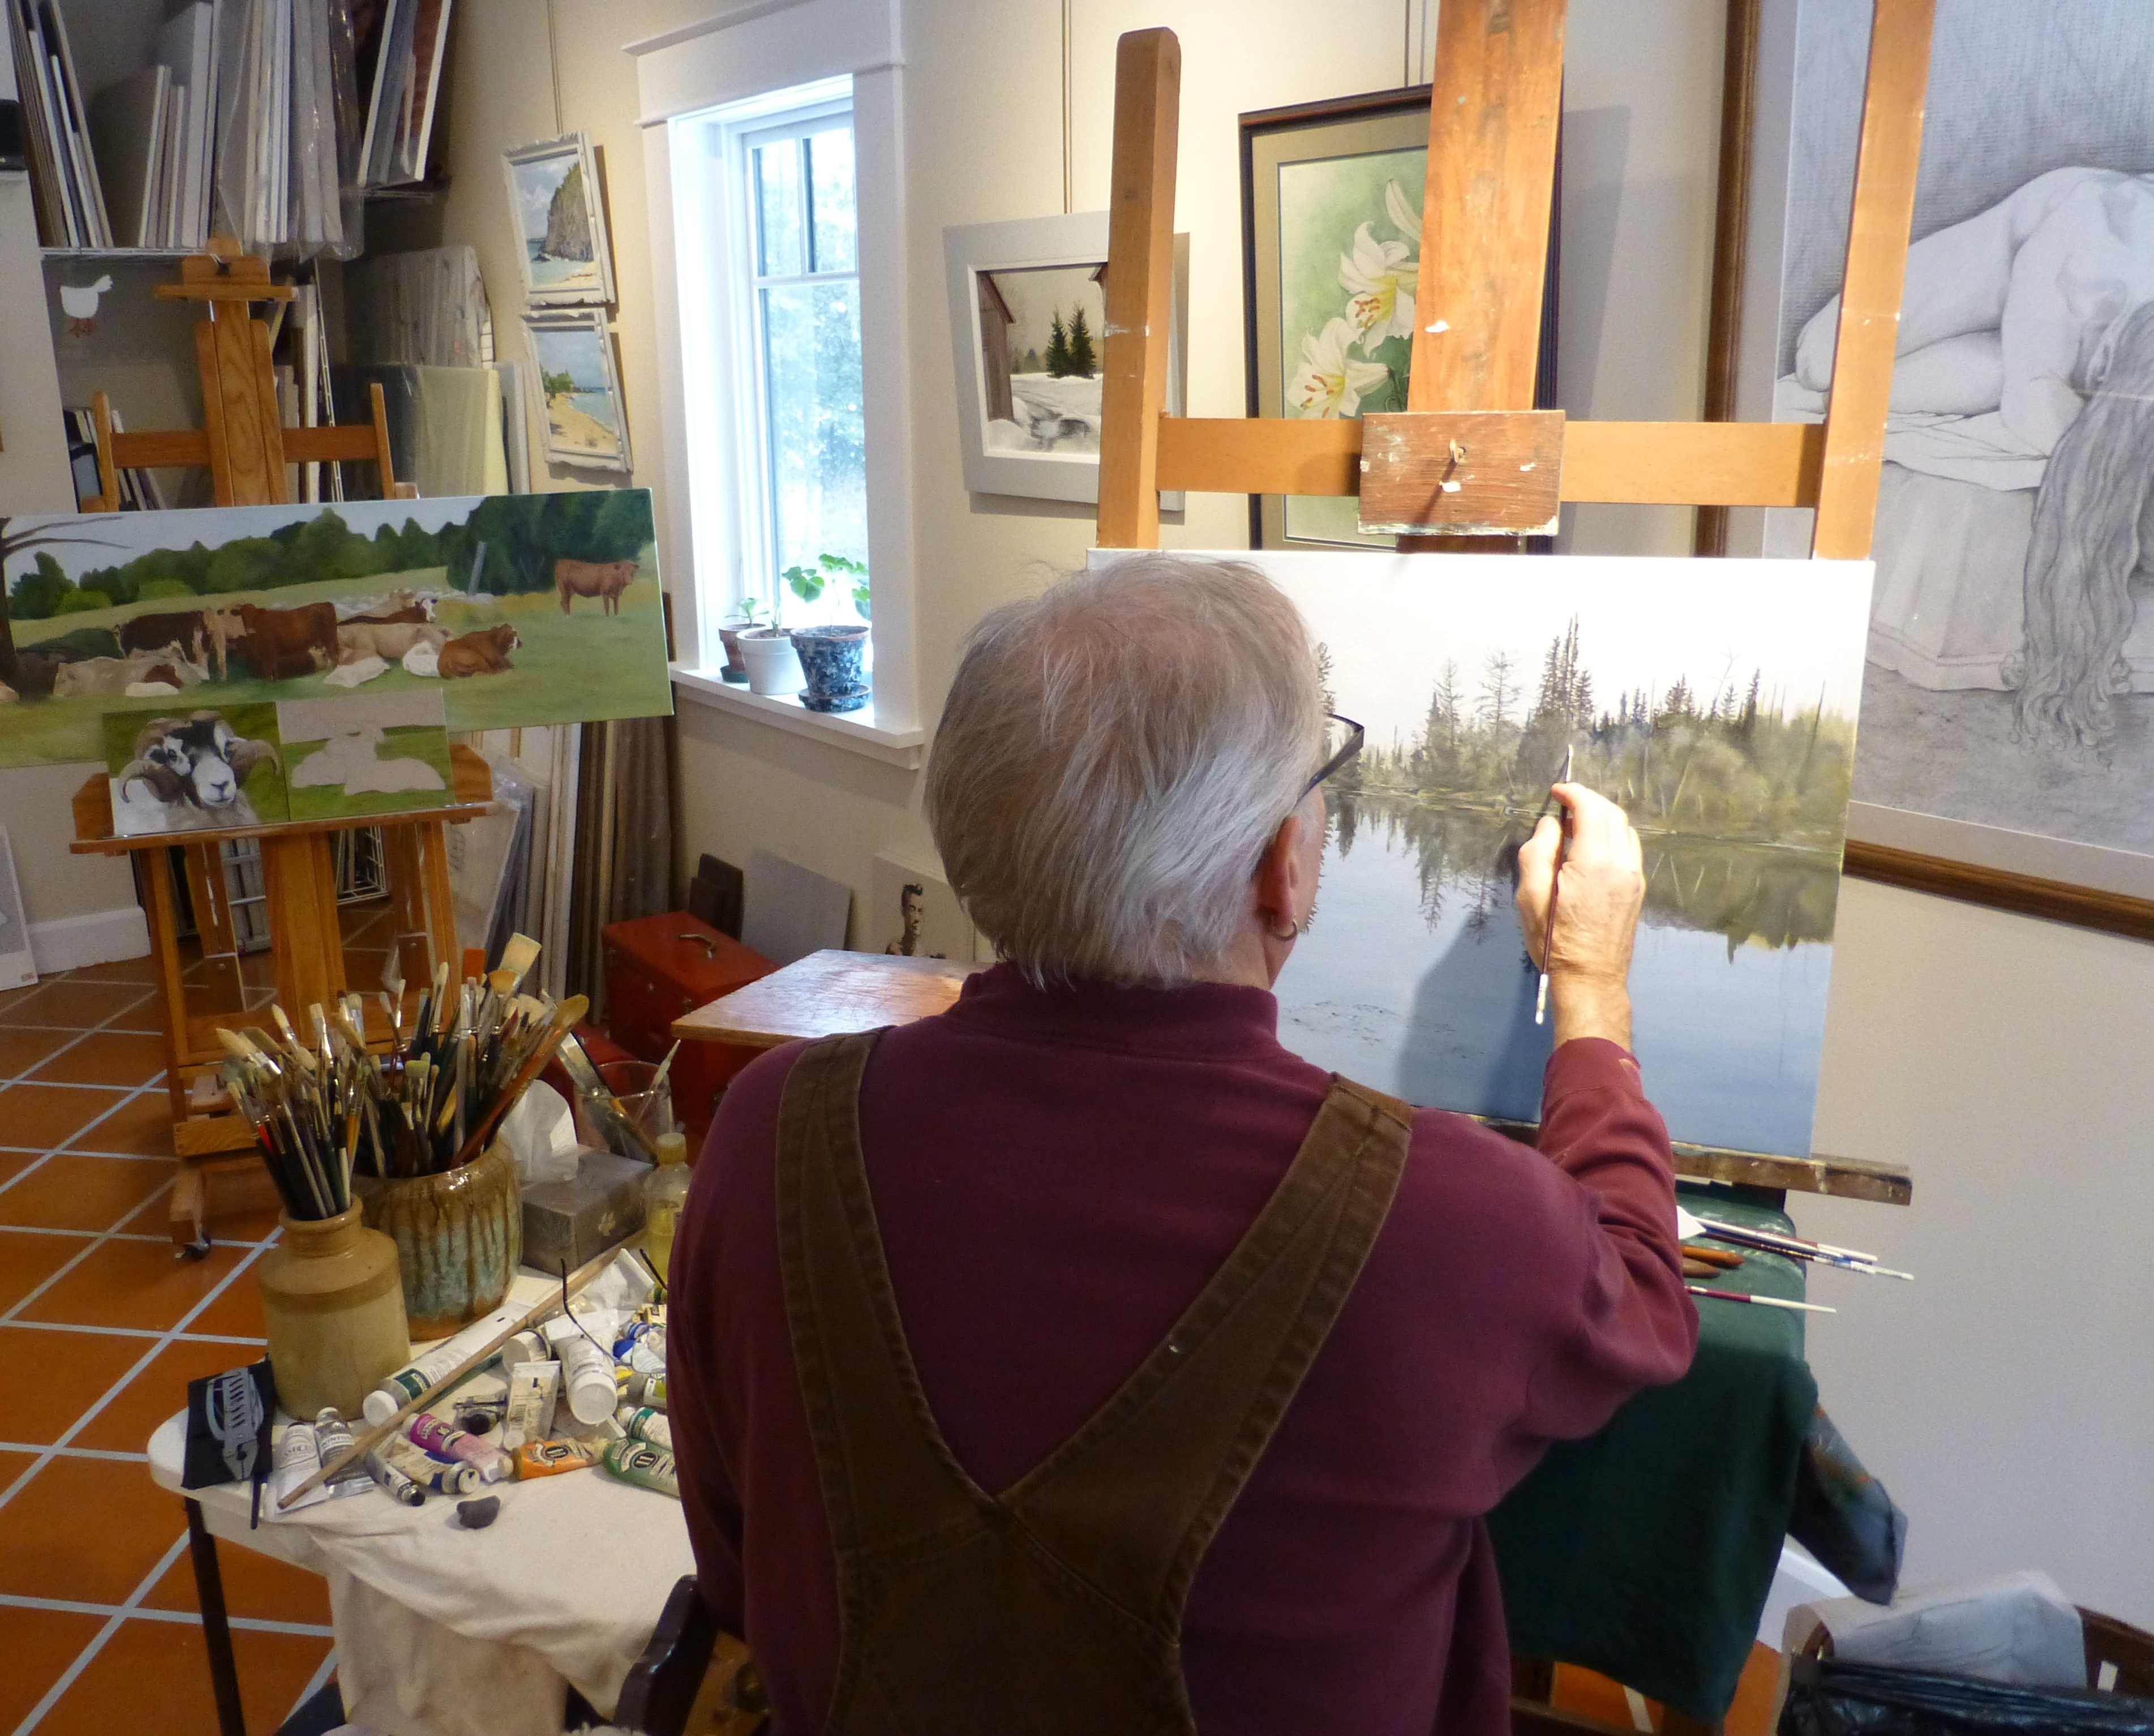 While I enjoy plein air sketching, the ambitious nature of my finished work
dictates that I work slowly and patiently, completing them in my studio.